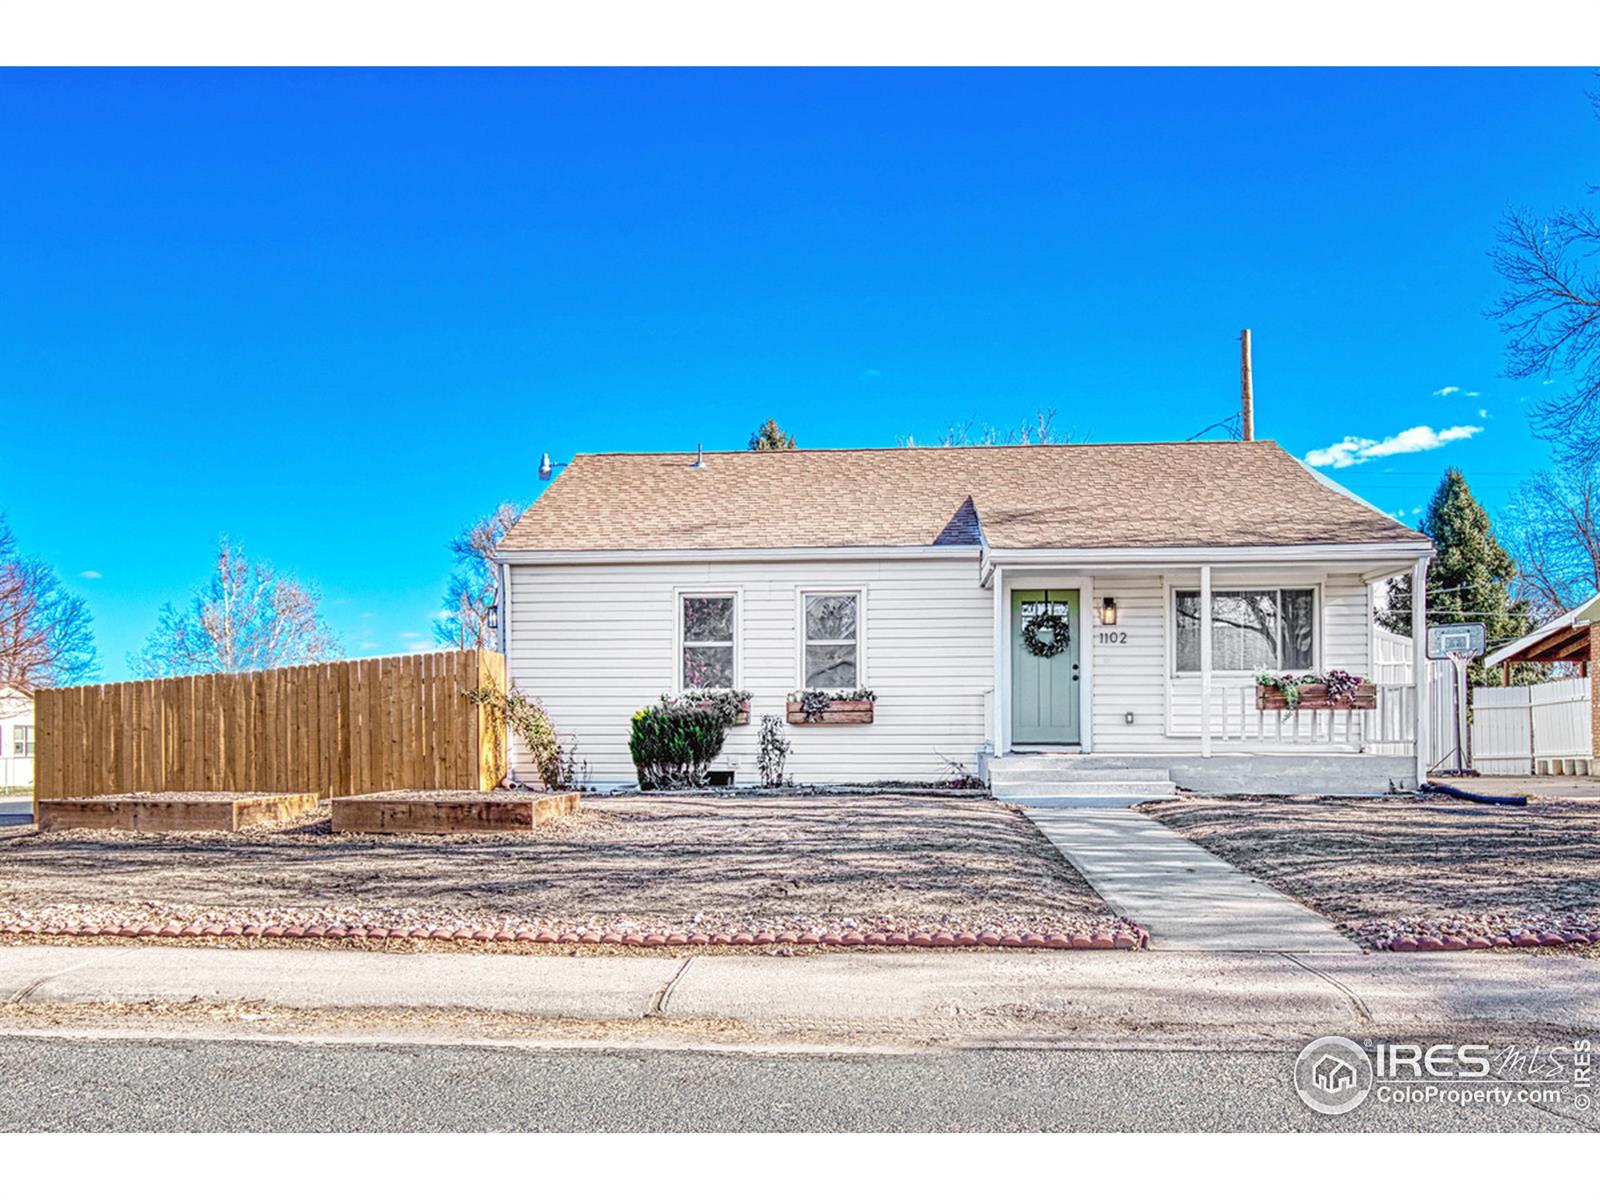 1102 33rd, Greeley, CO